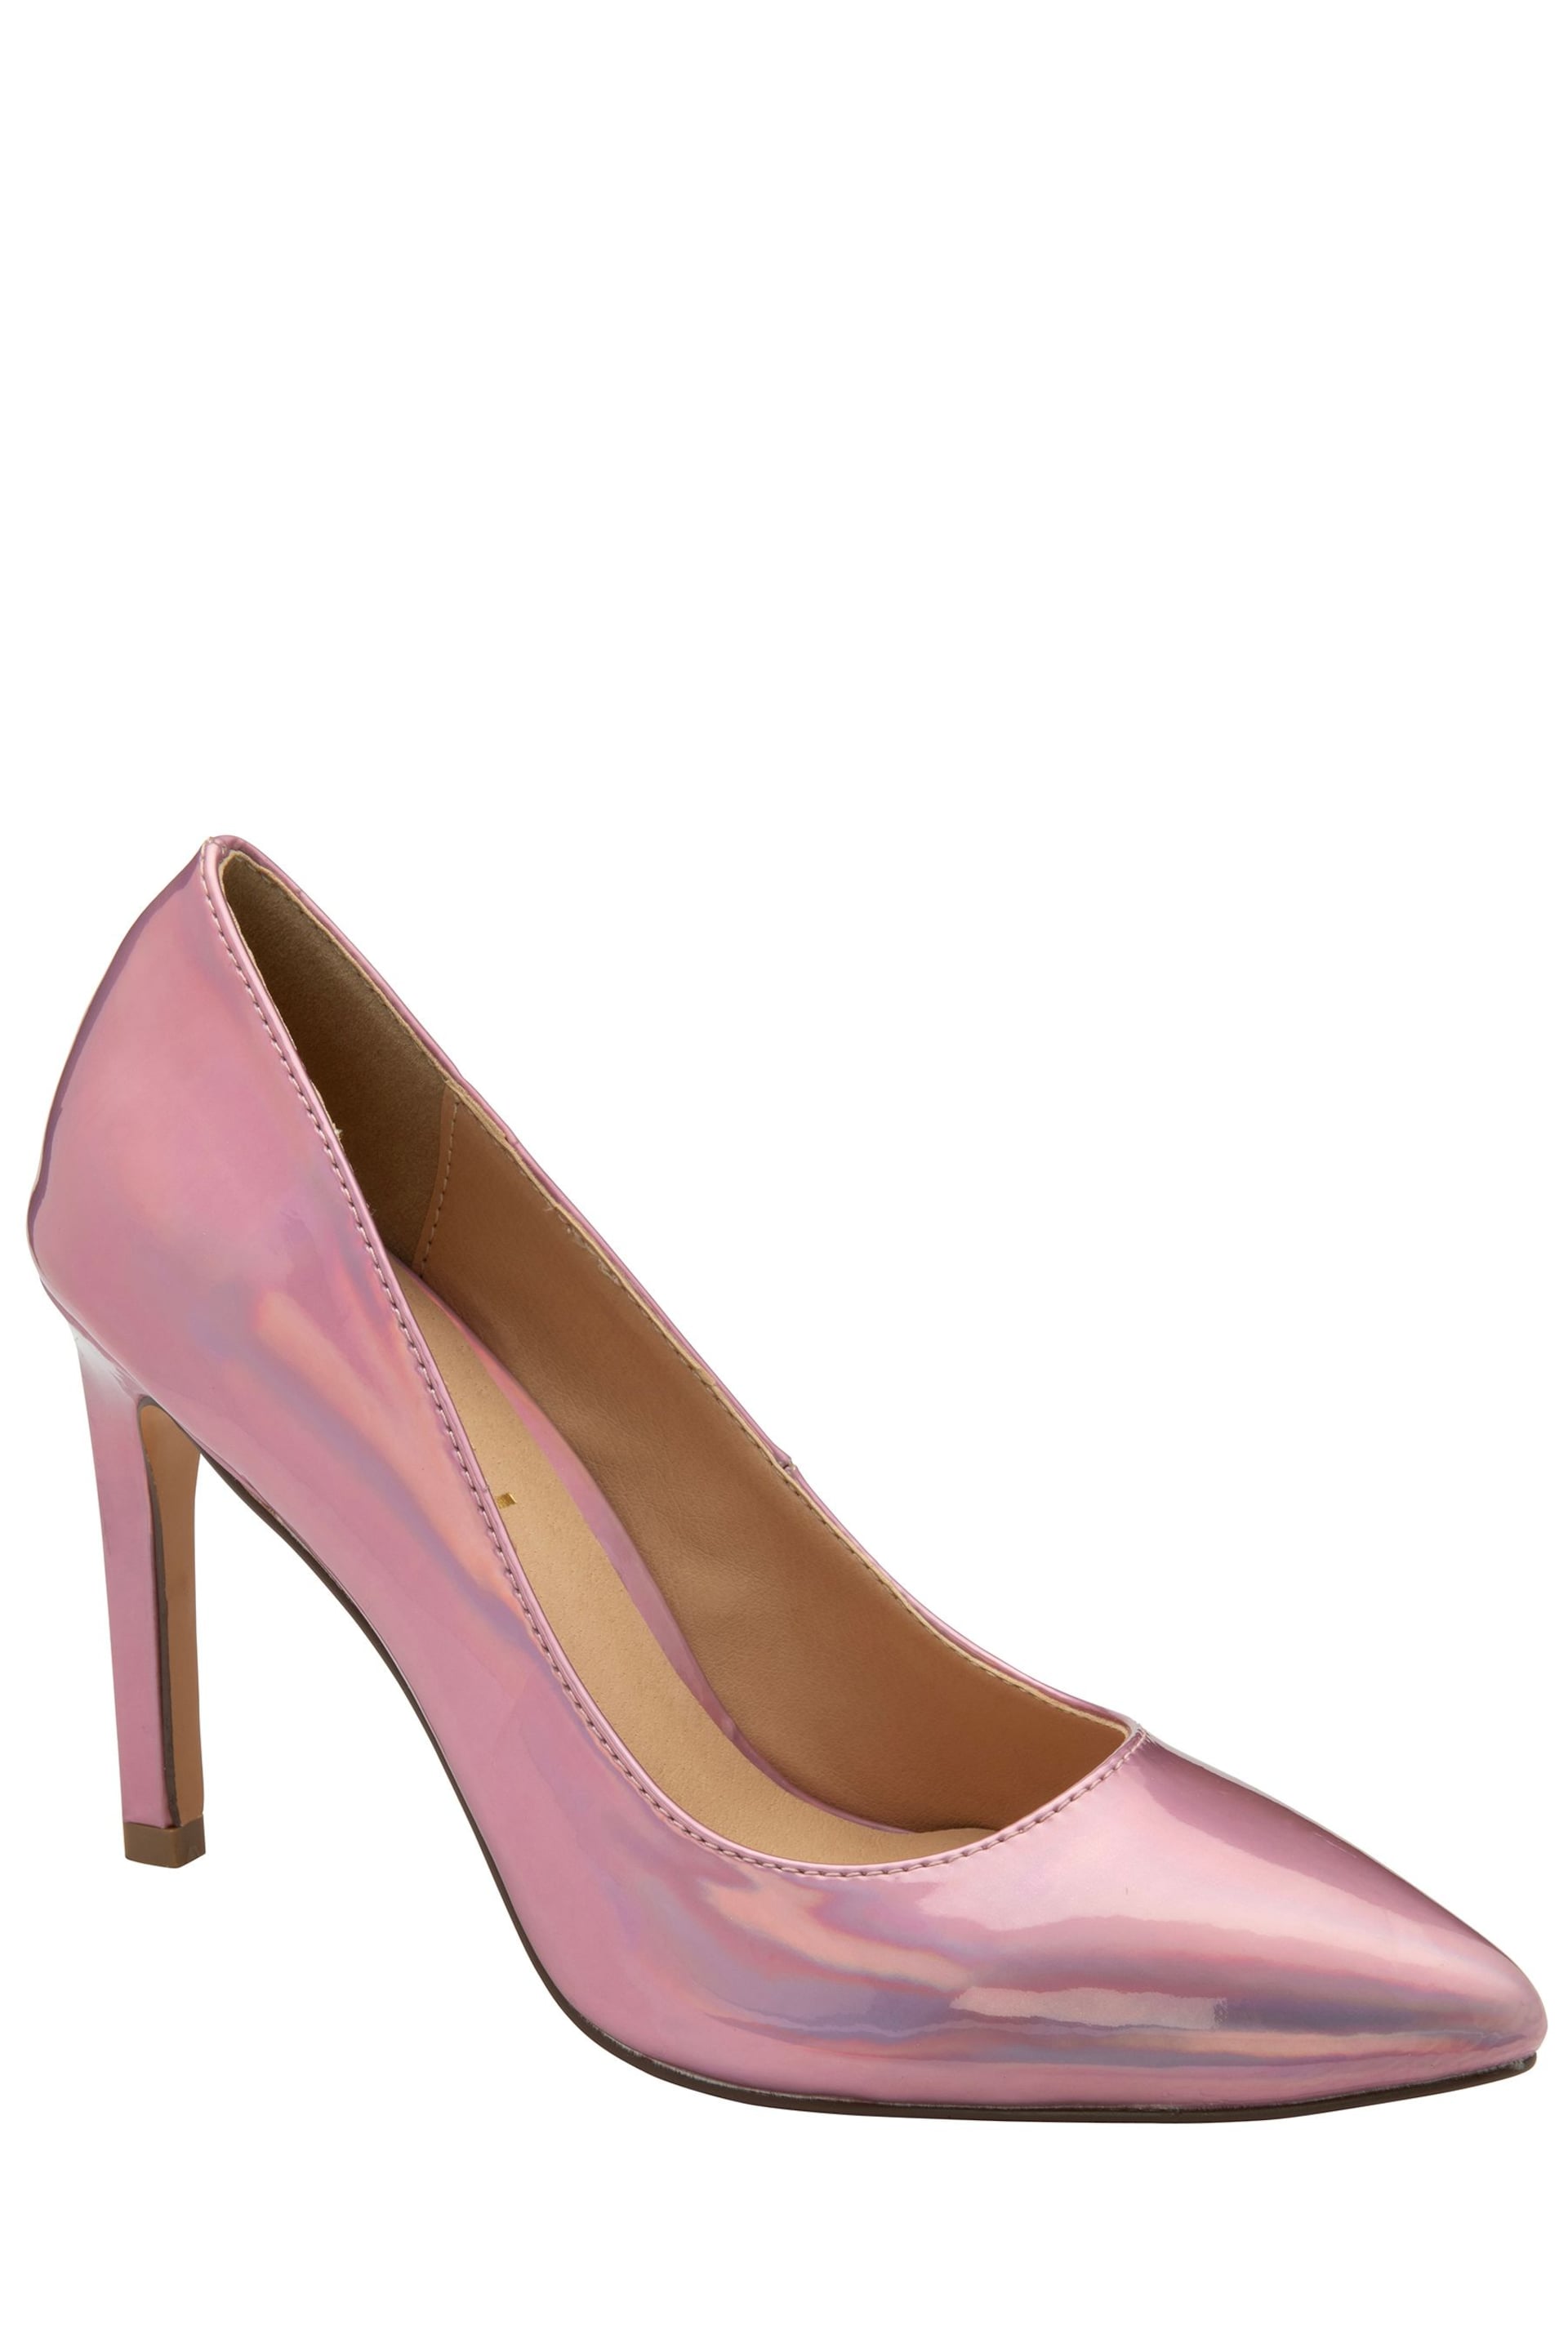 Ravel Pink Stiletto Heel Court Shoes - Image 1 of 4